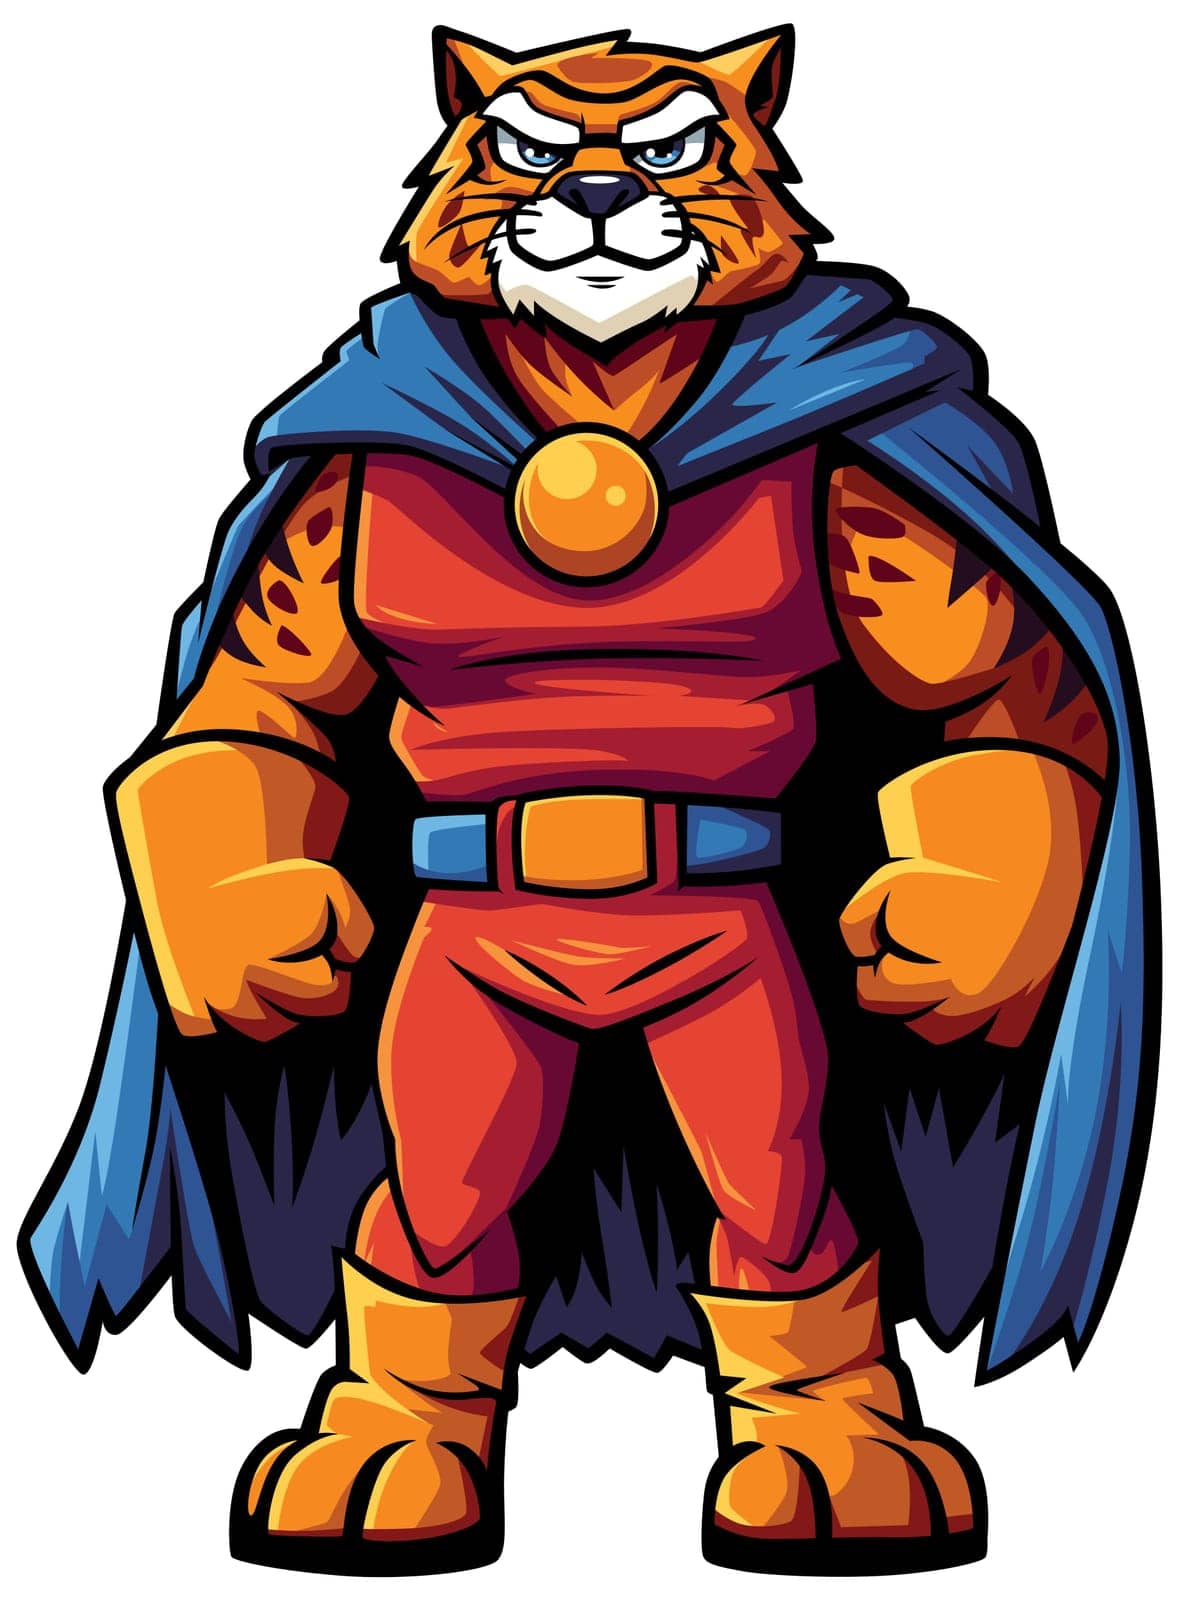 Tiger superhero exudes power in vibrant red outfit and blue cape. His fierce gaze and muscular build radiate valor and strength.